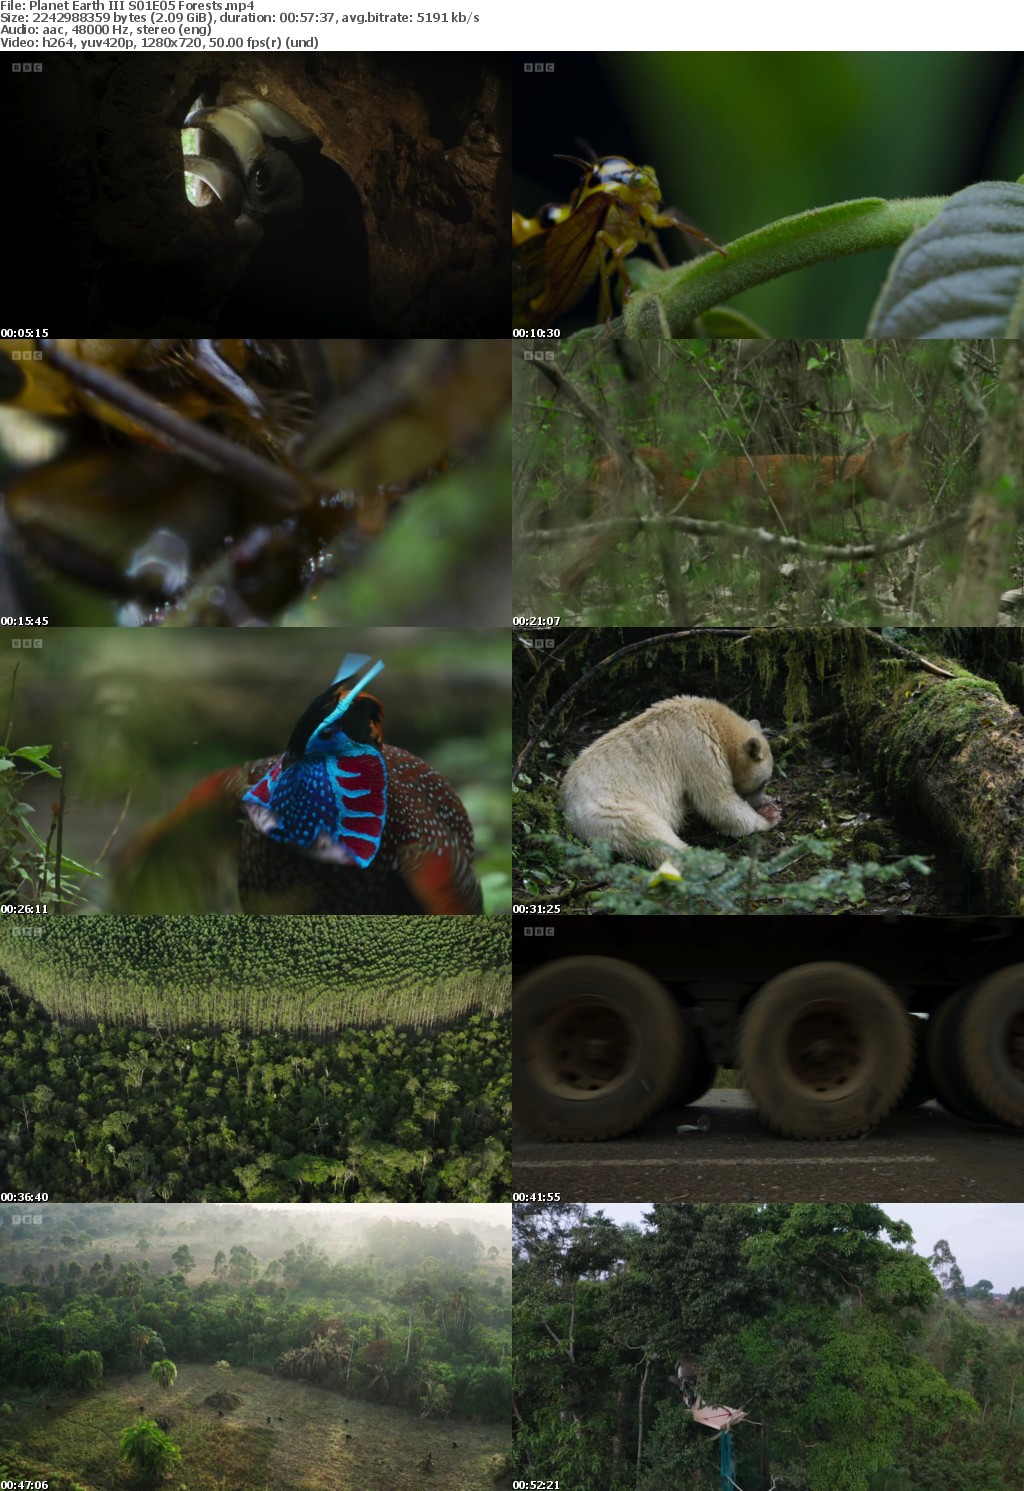 Planet Earth III S01E05 Forests (1280x720p HD, 50fps, soft Eng subs)